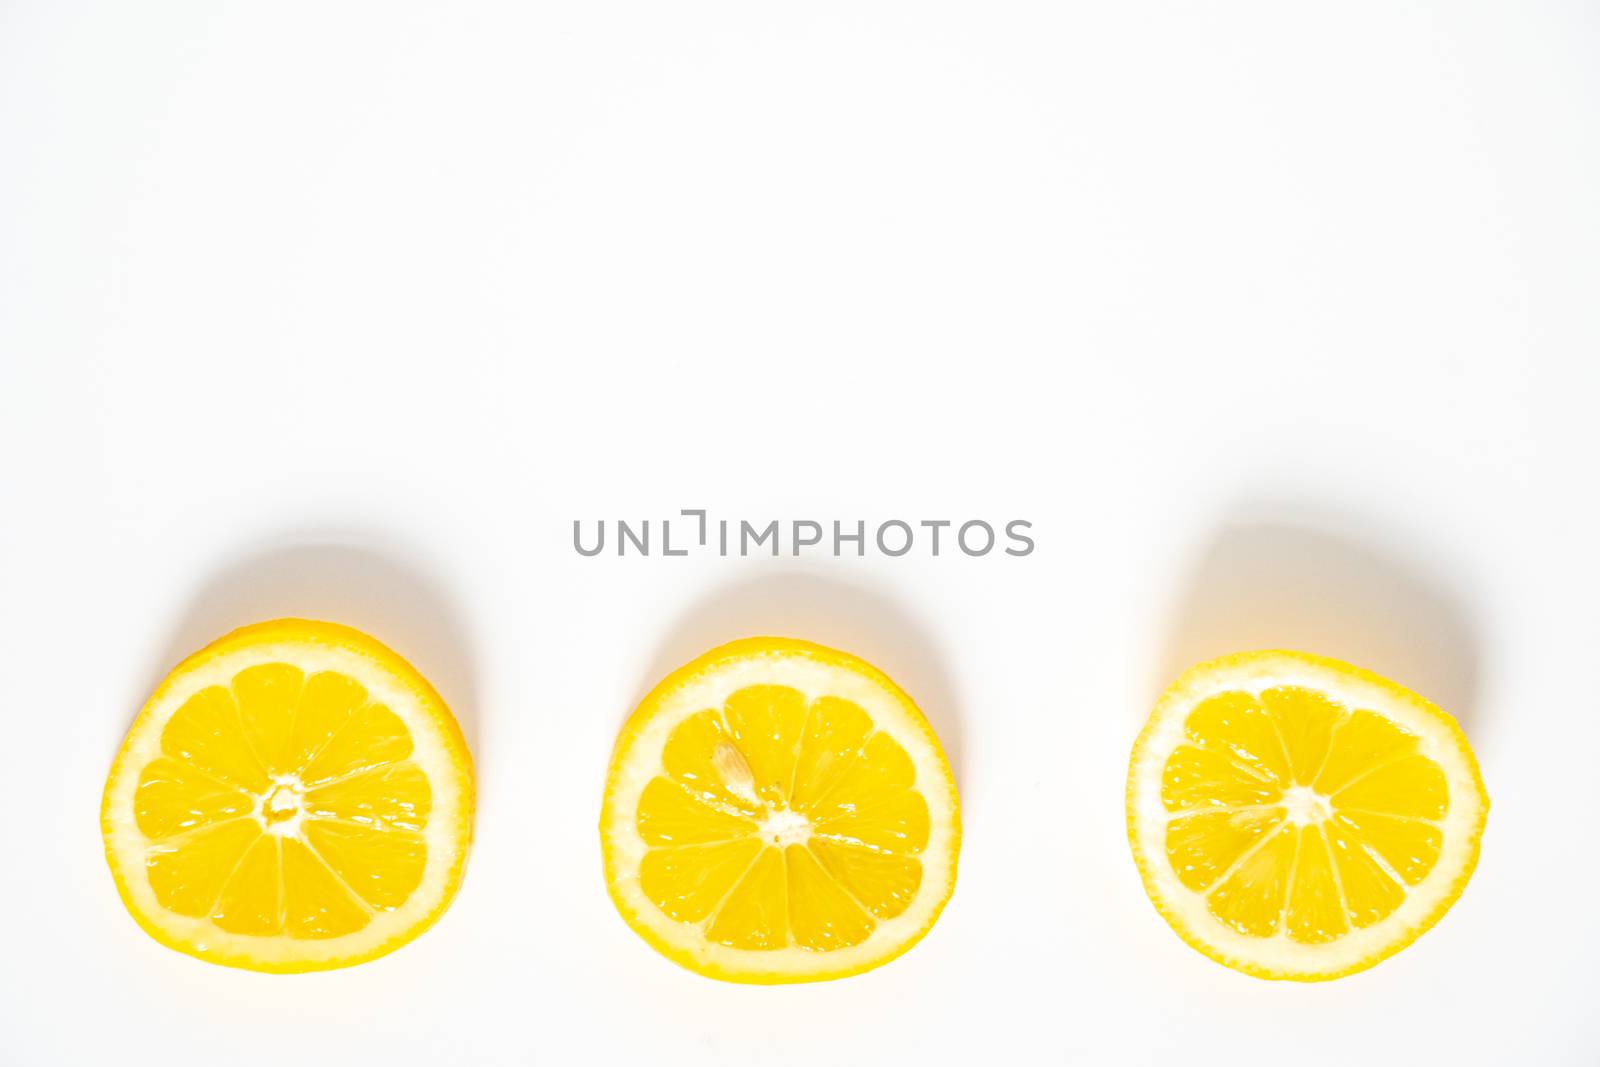 Three slices of lemon in a row against a plain white background